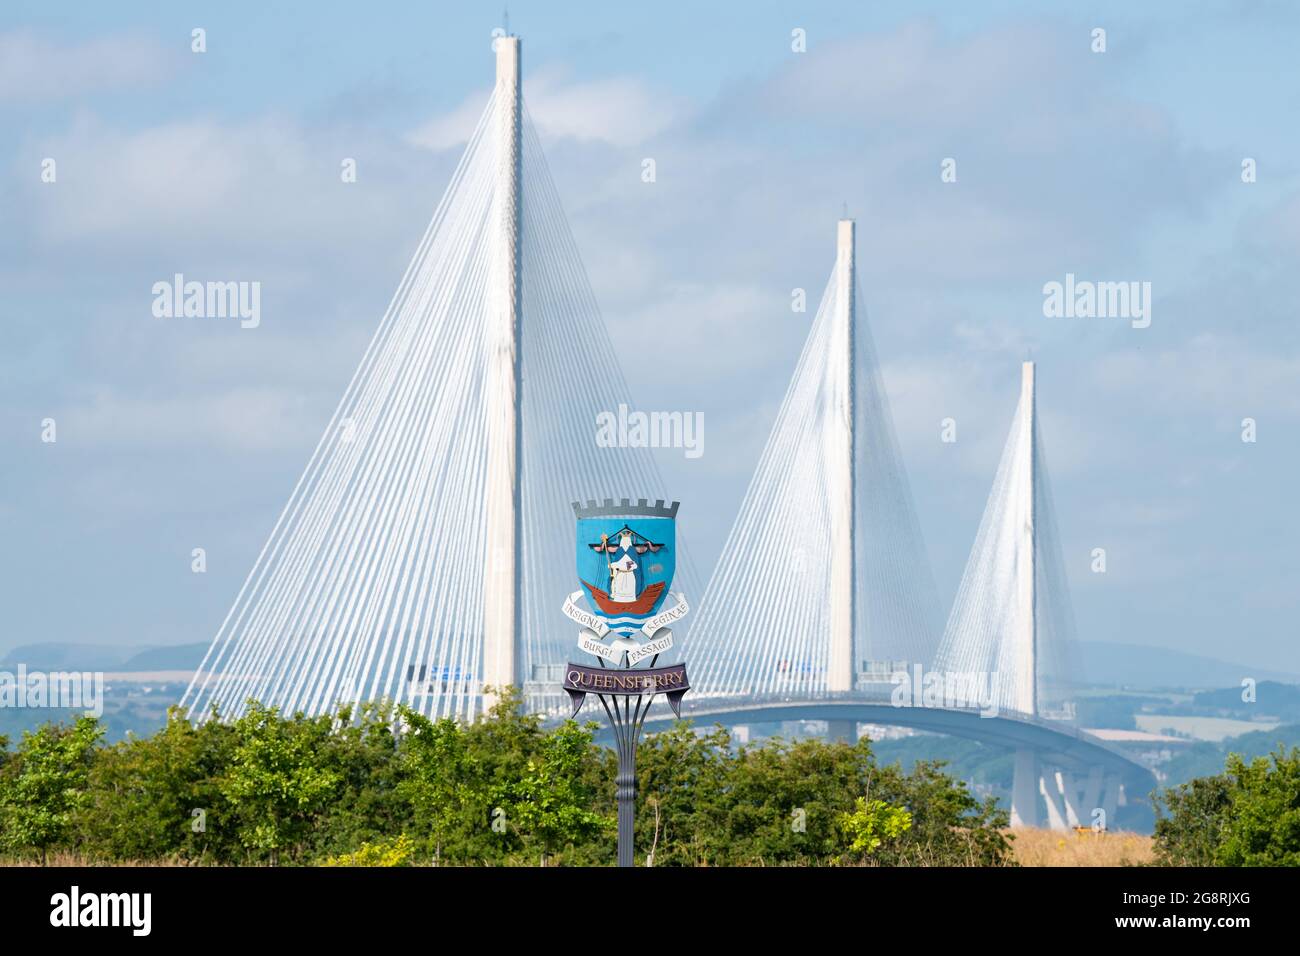 Queensferry road sign with the Queensferry Crossing bridge behind, South Queensferry, Scotland, UK Stock Photo